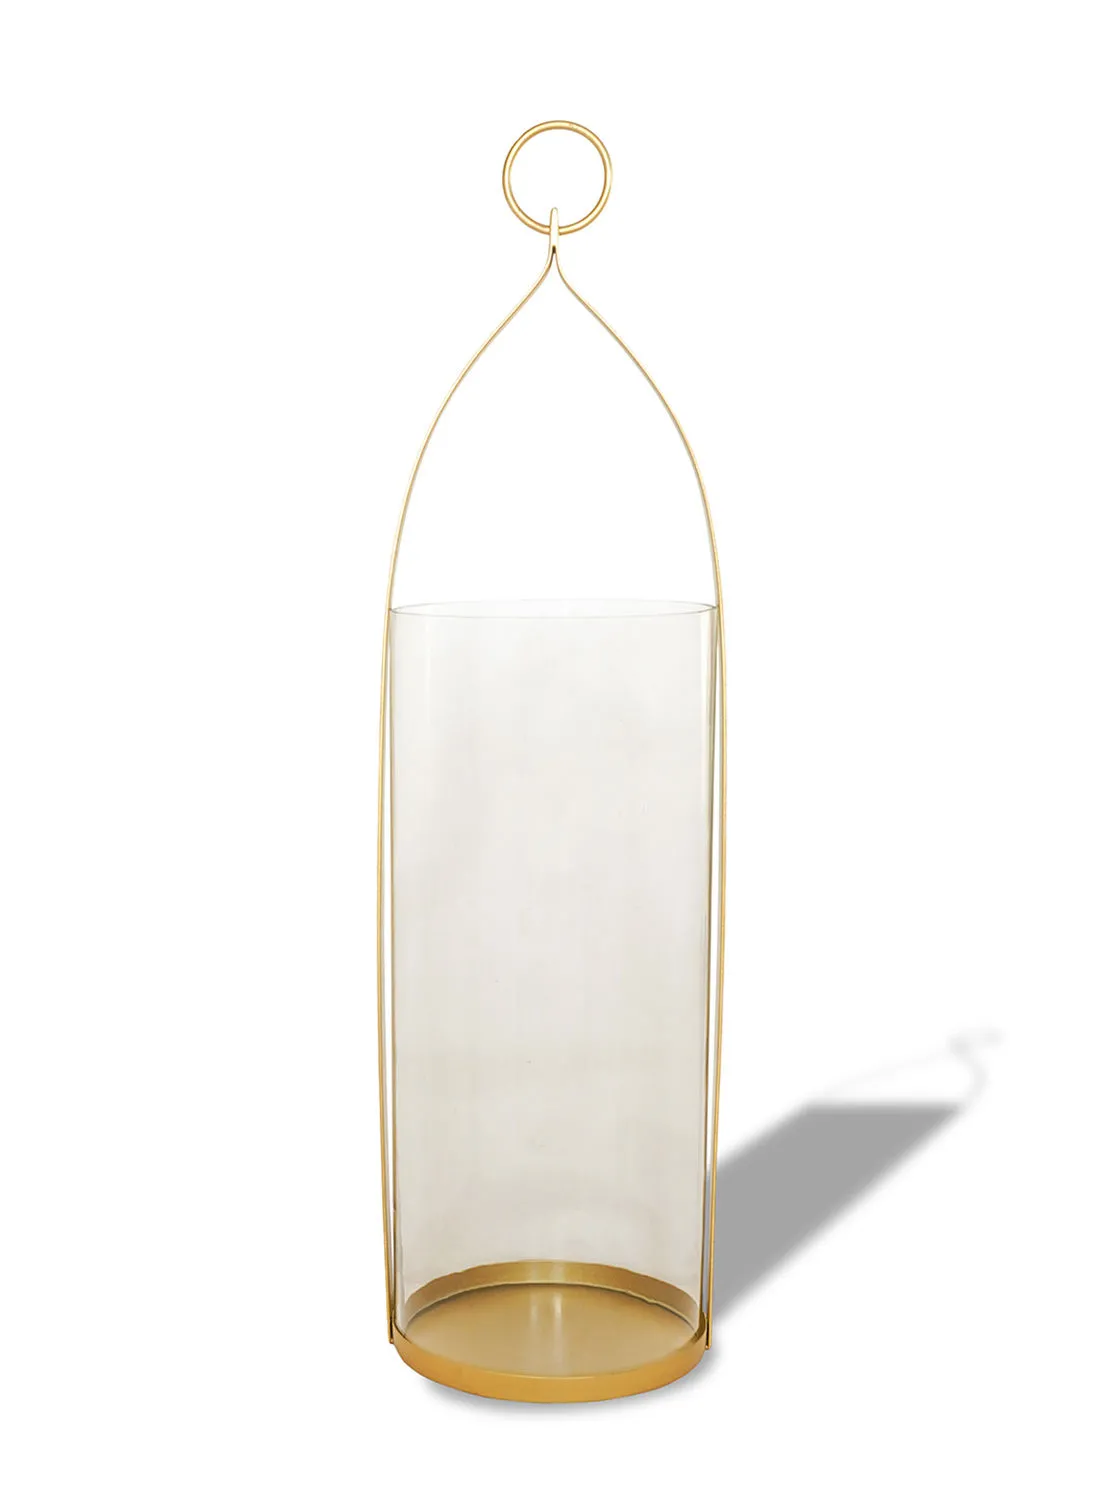 ebb & flow Ramadan Metal Hurricane Pillar Candle Holder Unique Luxury Quality Scents For The Perfect Stylish Home Gold 15.5 x 15.5 x 54centimeter